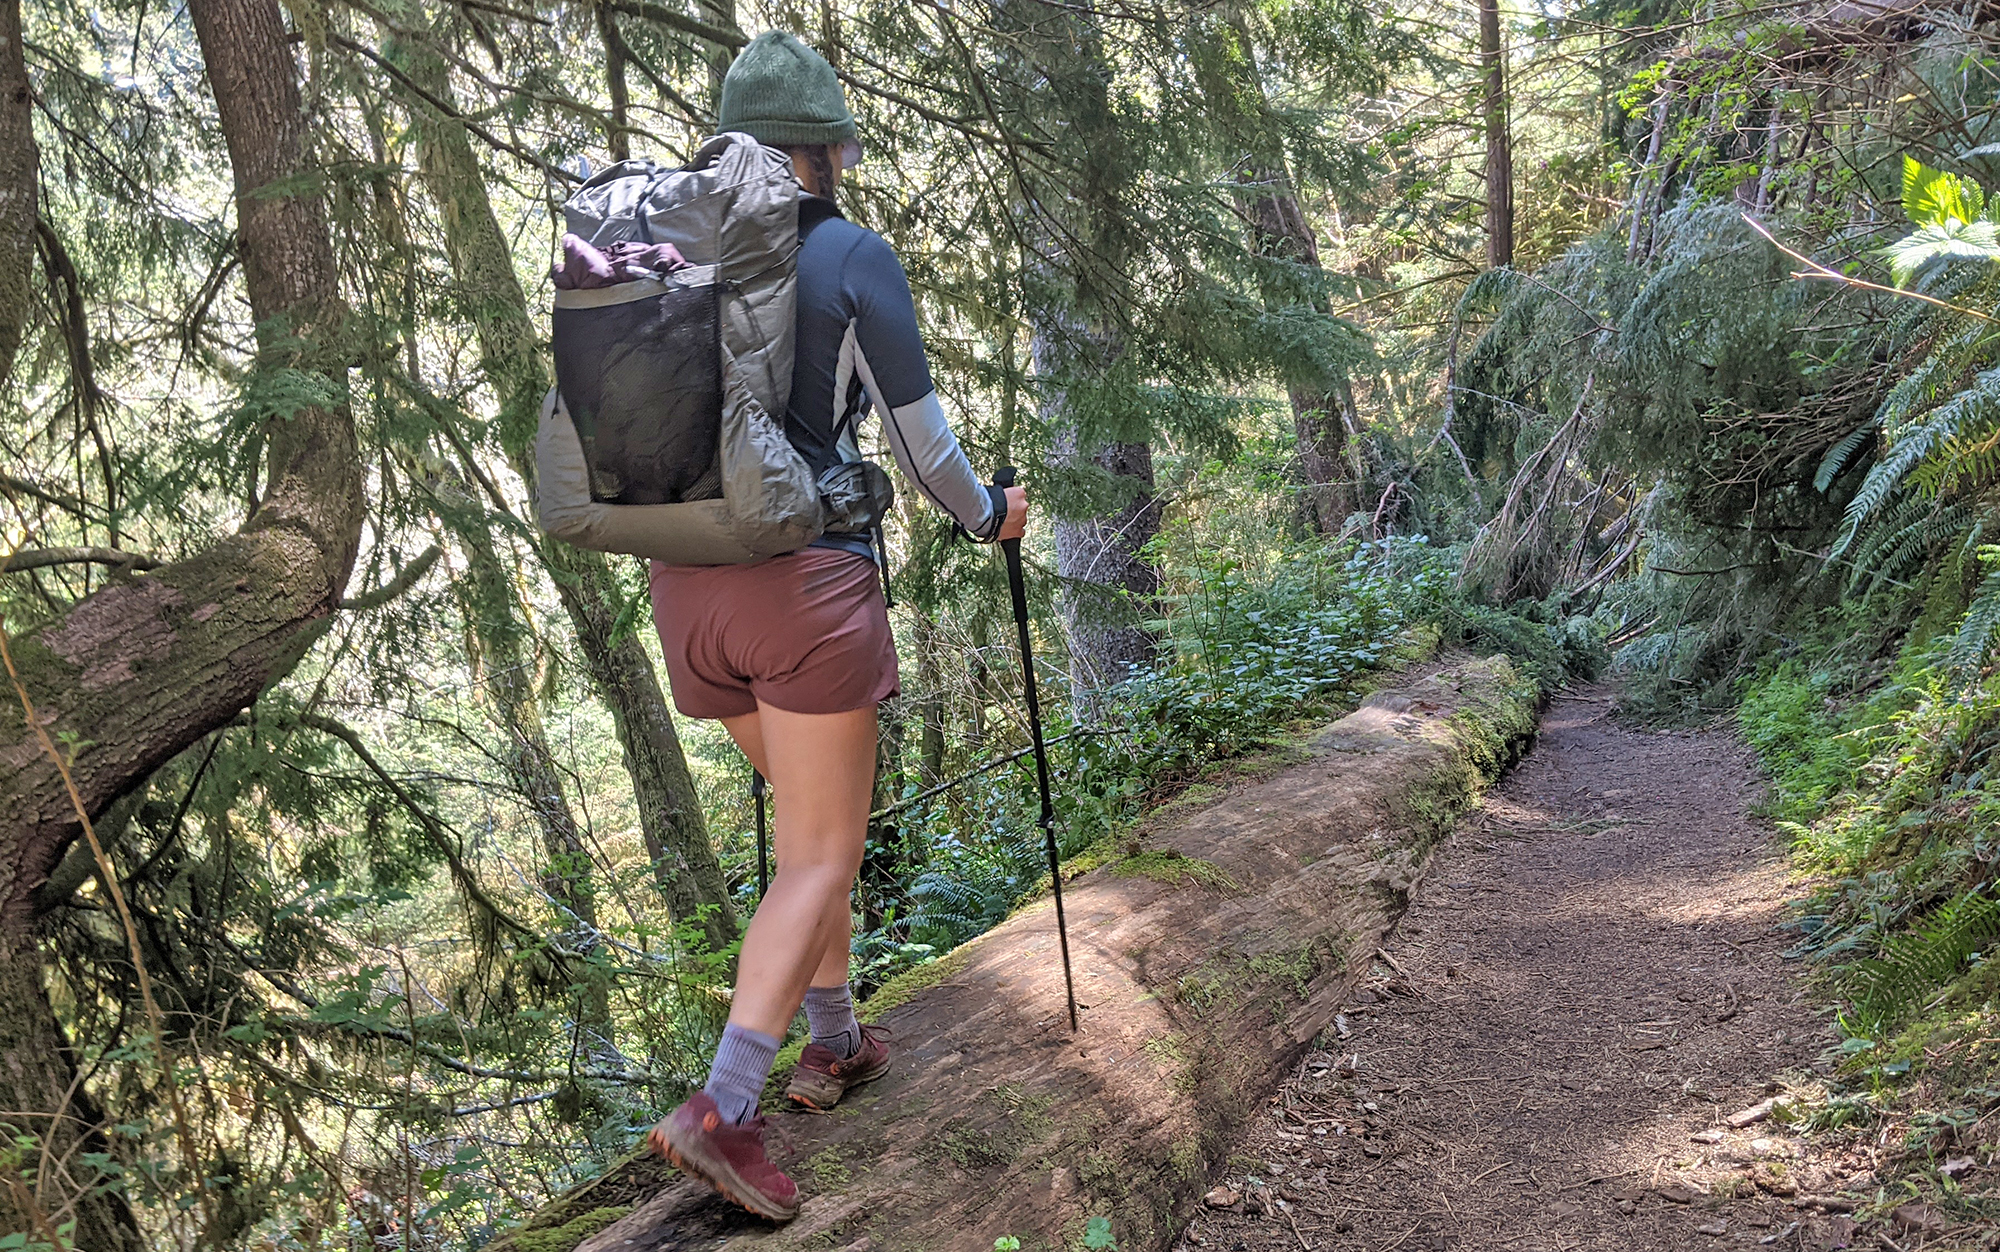 The author uses CMT’s sturdy and reliable value trekking poles to balance on a log.